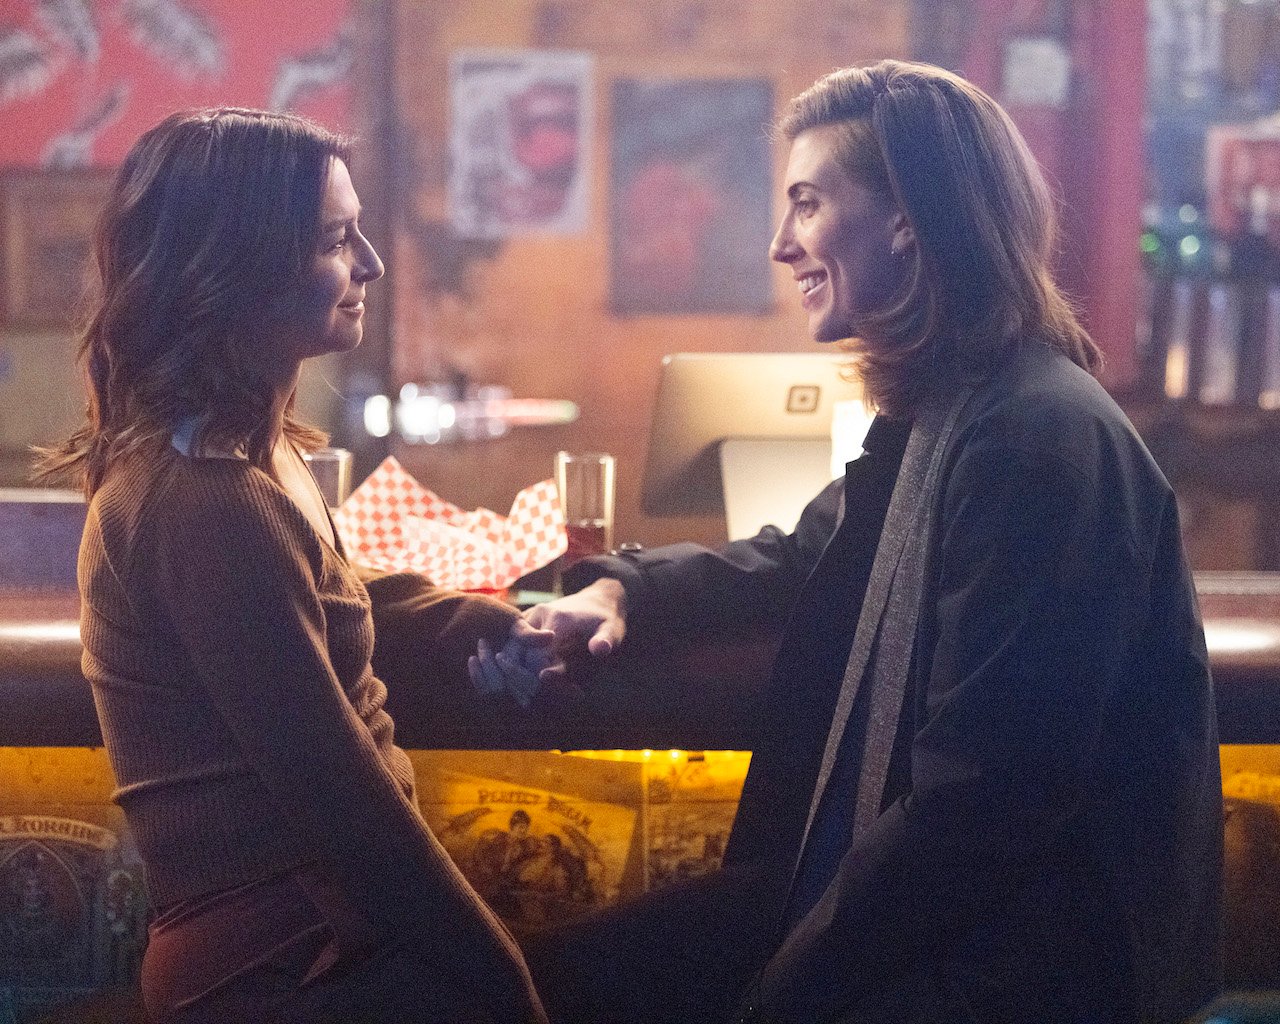 Caterina Scorsone as Amelia and E.R. Fightmaster as Kai sit at a bar together on 'Grey's Anatomy'.